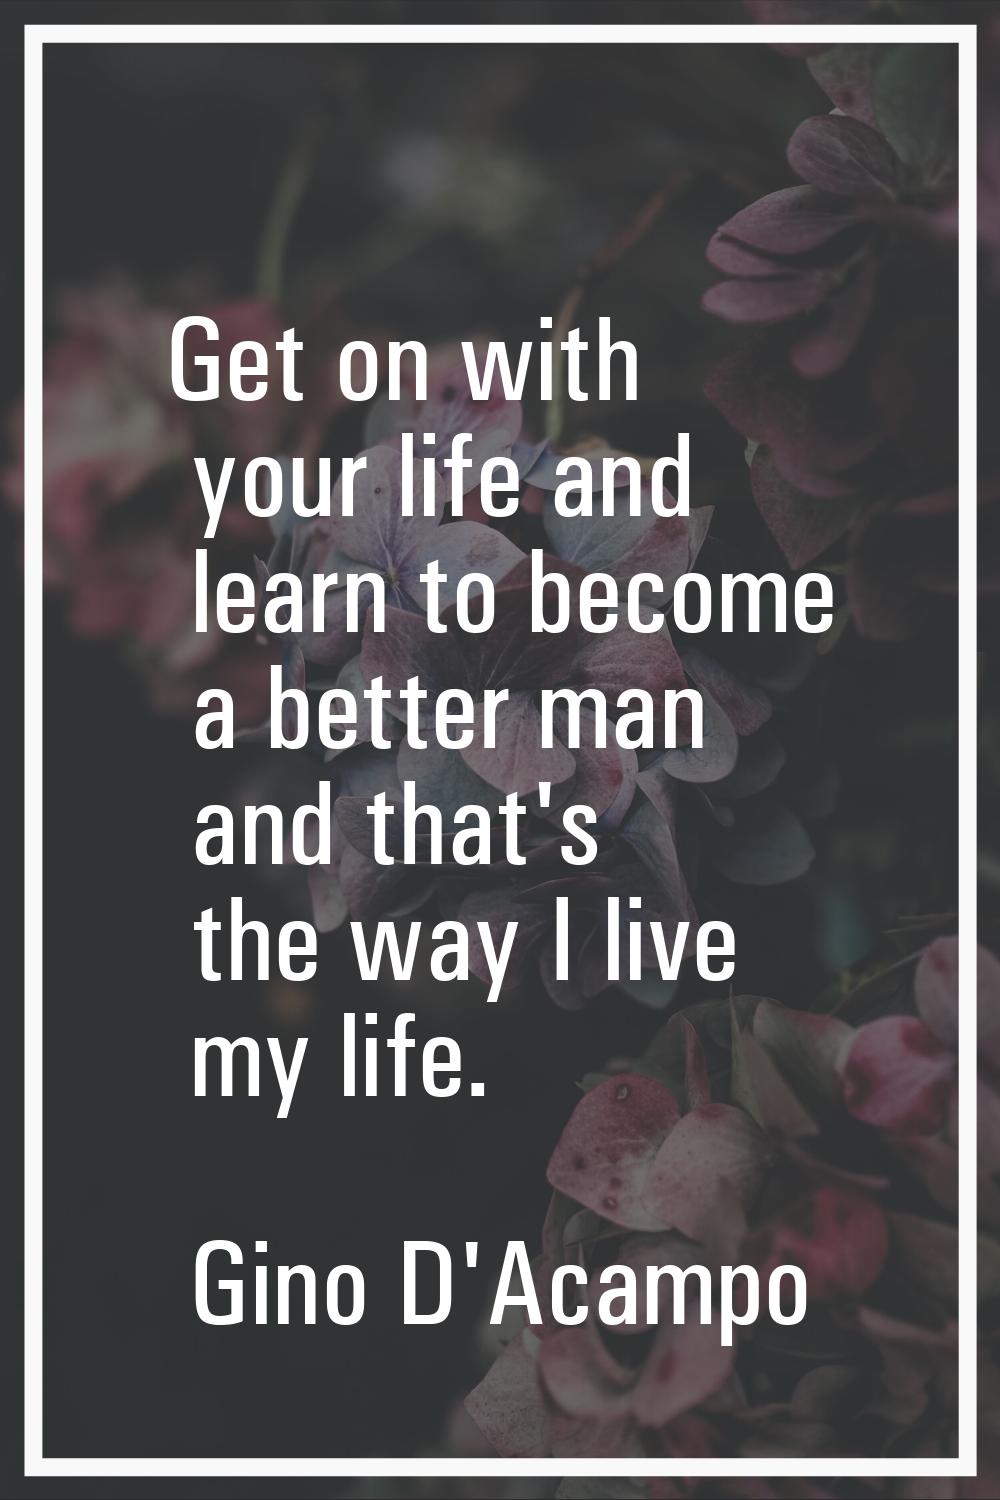 Get on with your life and learn to become a better man and that's the way I live my life.